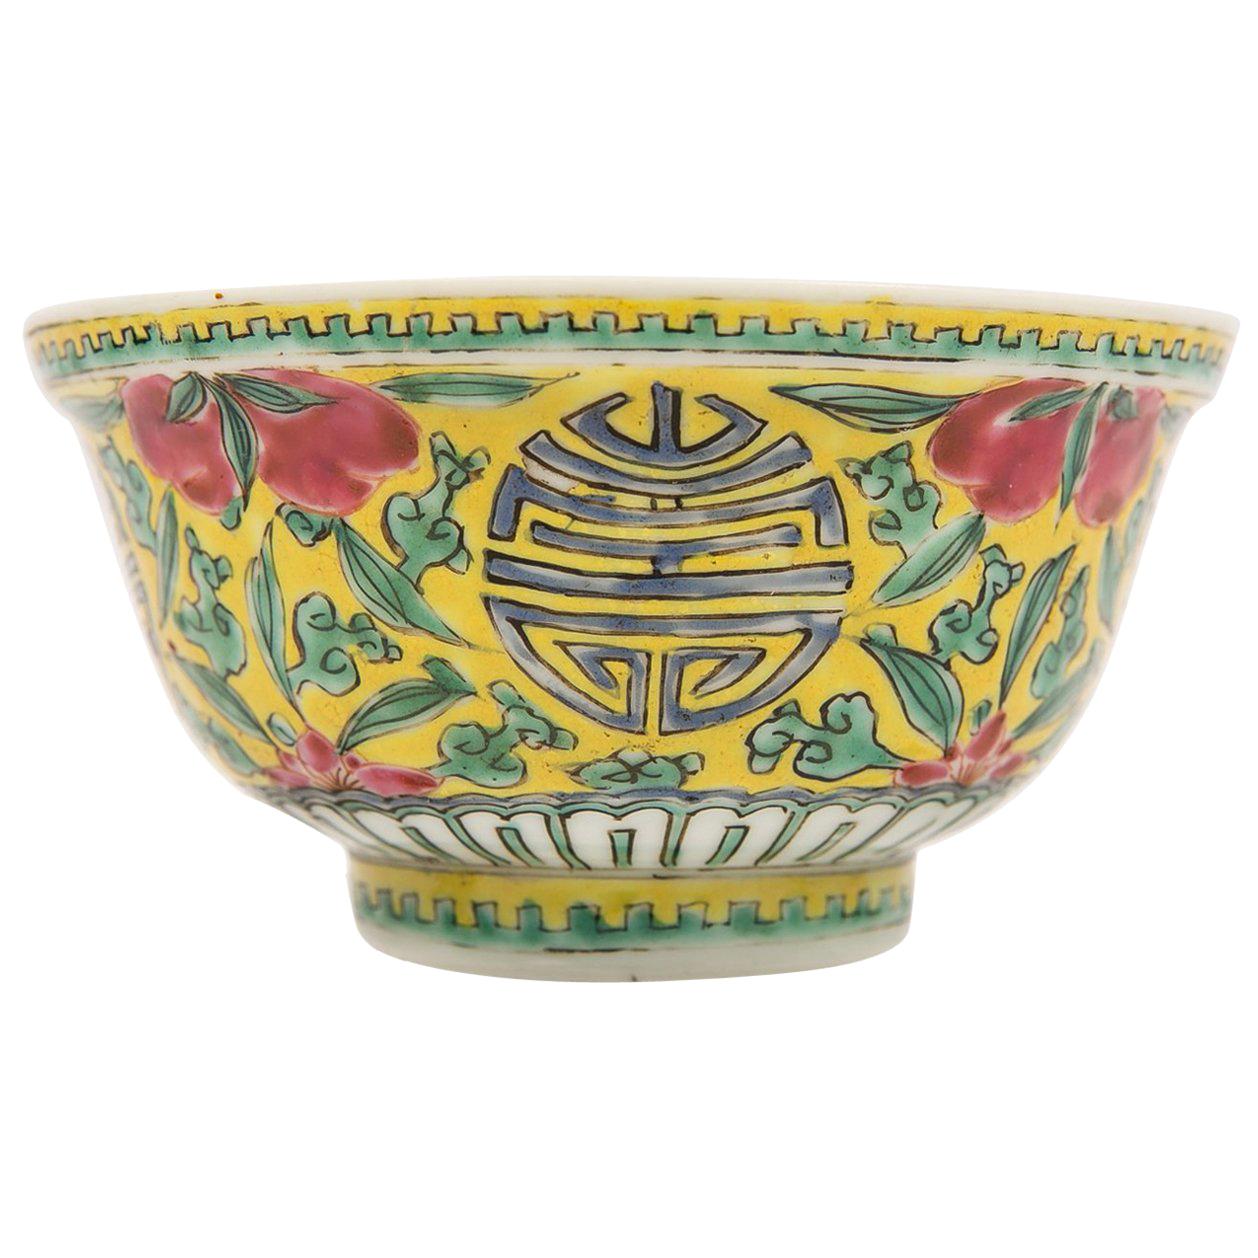 Qing Chinese Porcelain Bowl with "Longevity" Symbols Made Late 19th Century